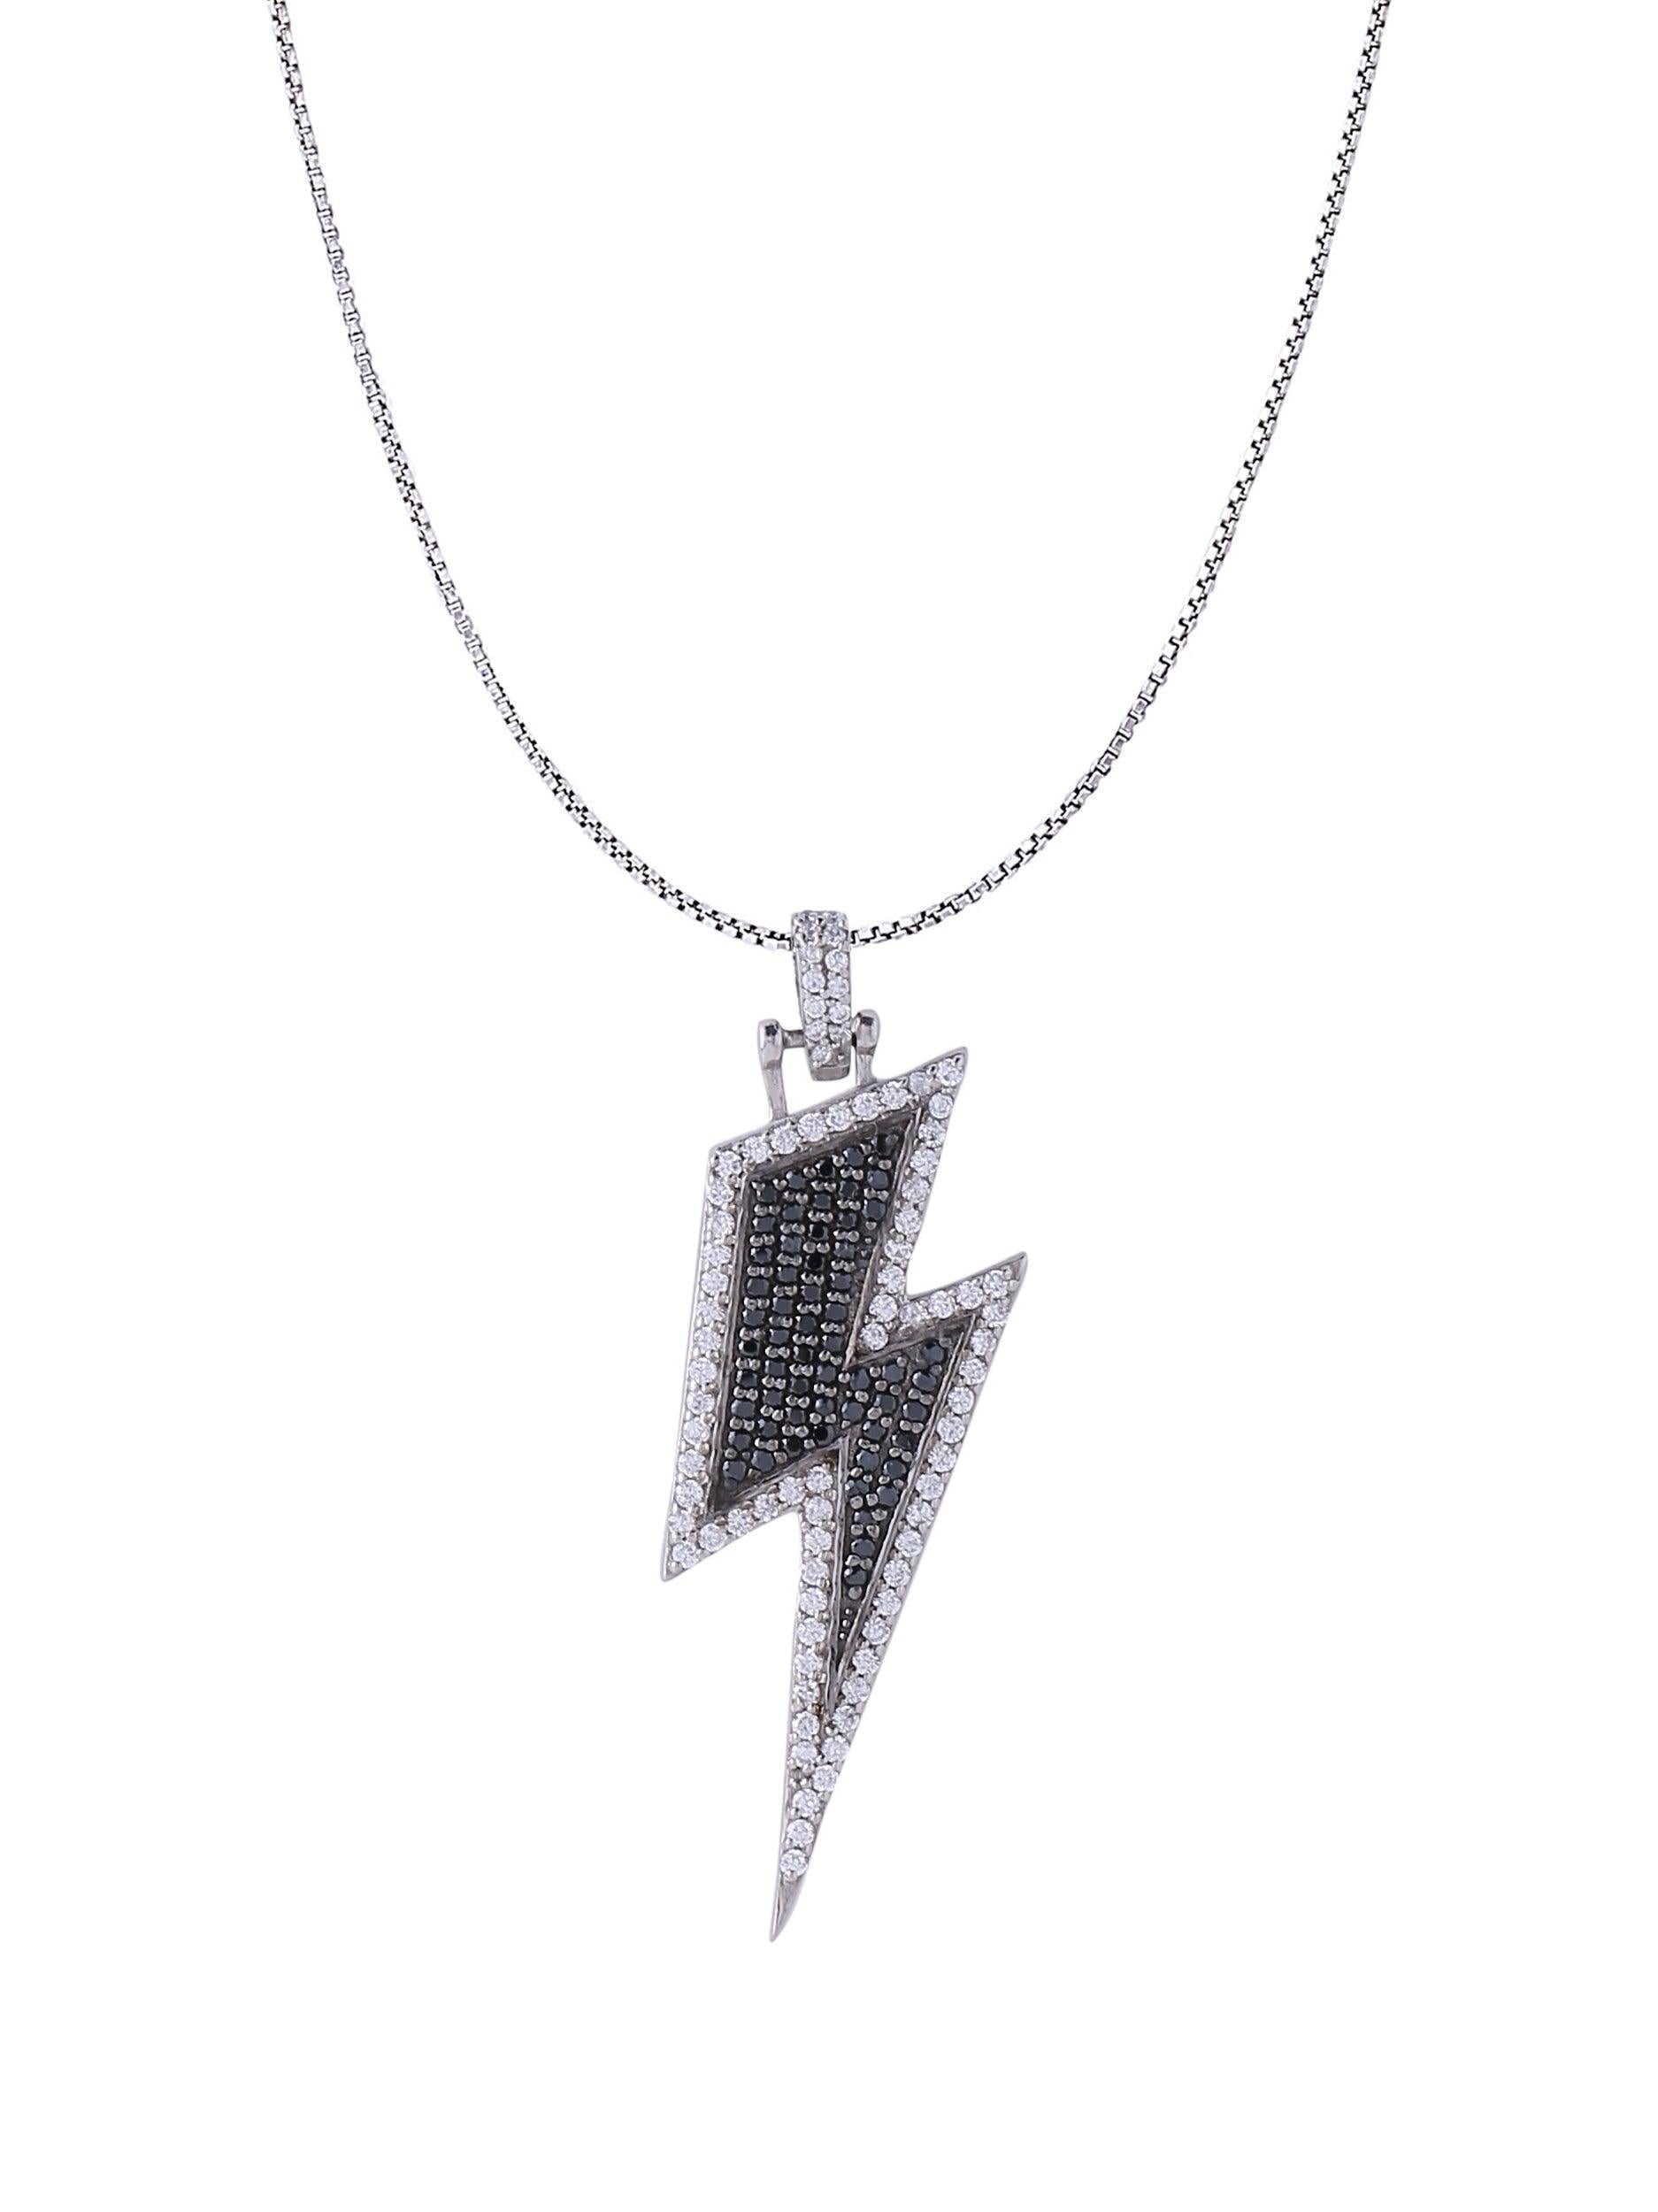 White Gold Color Black Flash Pendant Made of 925 Sterling Silver Material with 20 Inch Long Silver Chain